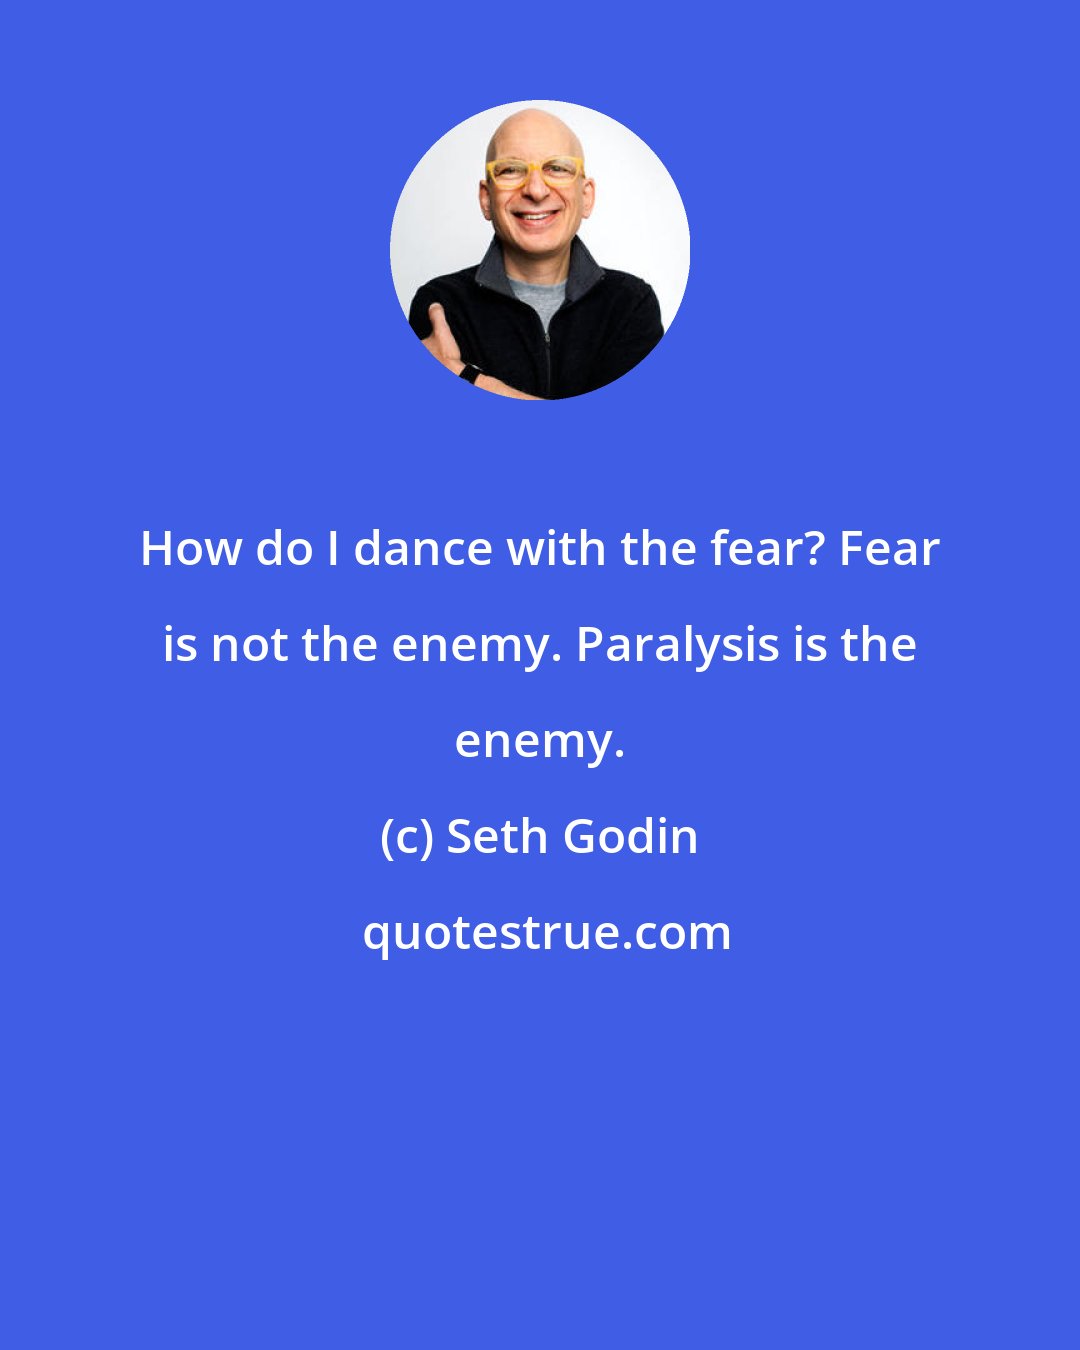 Seth Godin: How do I dance with the fear? Fear is not the enemy. Paralysis is the enemy.